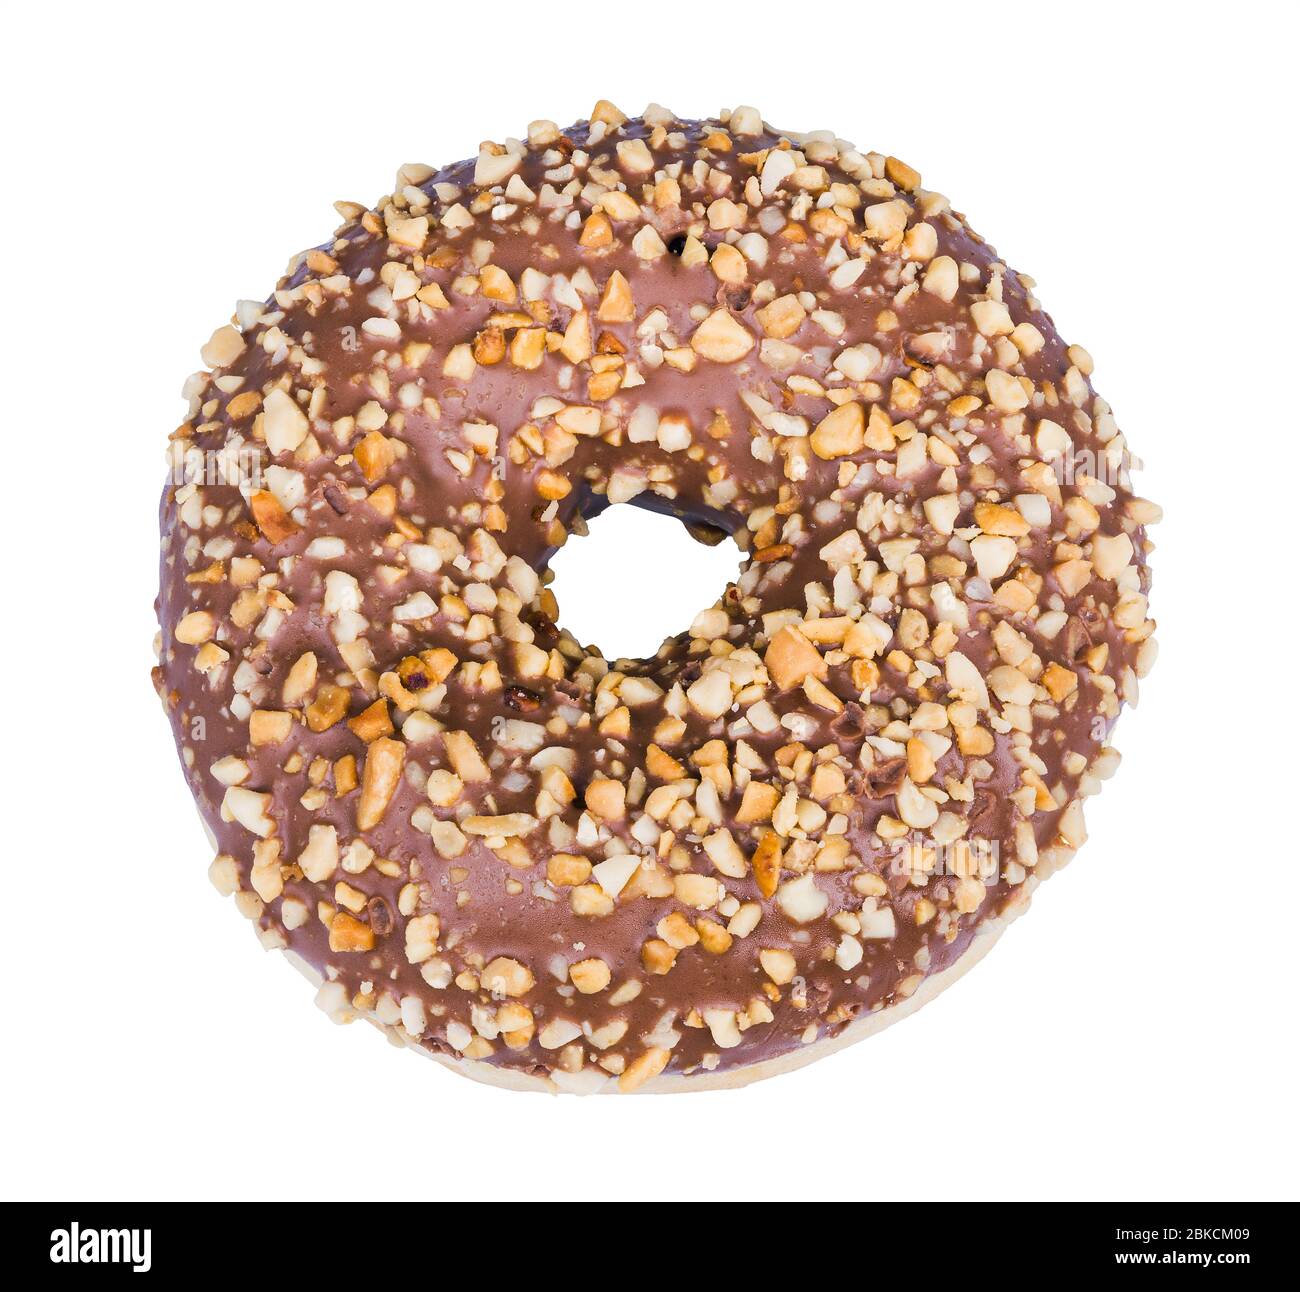 Baked donut decorated with nougat icing and crushed nuts isolated on white background. One sweet doughnut with round hole, cocoa glaze and nut pieces. Stock Photo